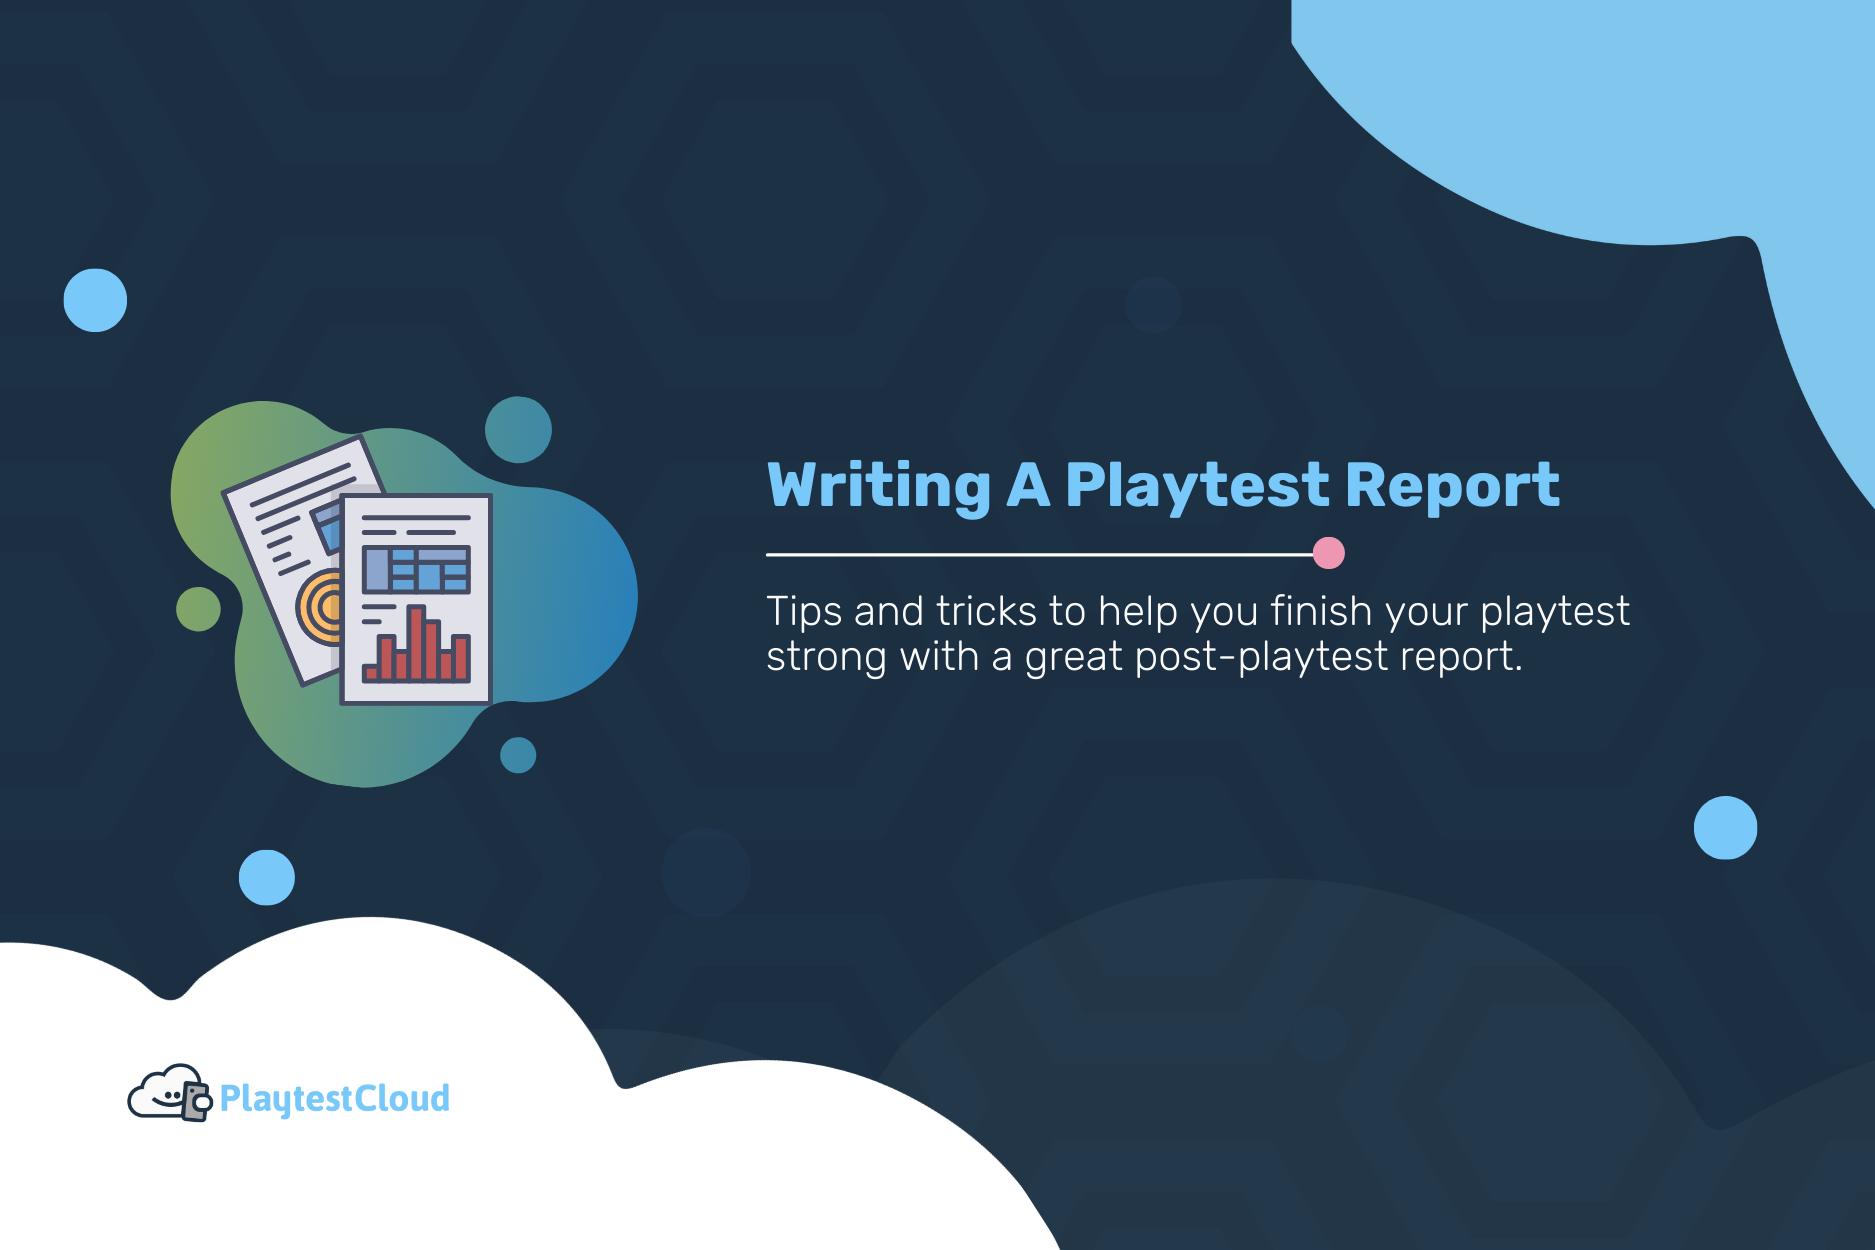 Writing A Playtest Report: Tips and Tricks for Creating a Strong Post-Playtest Report